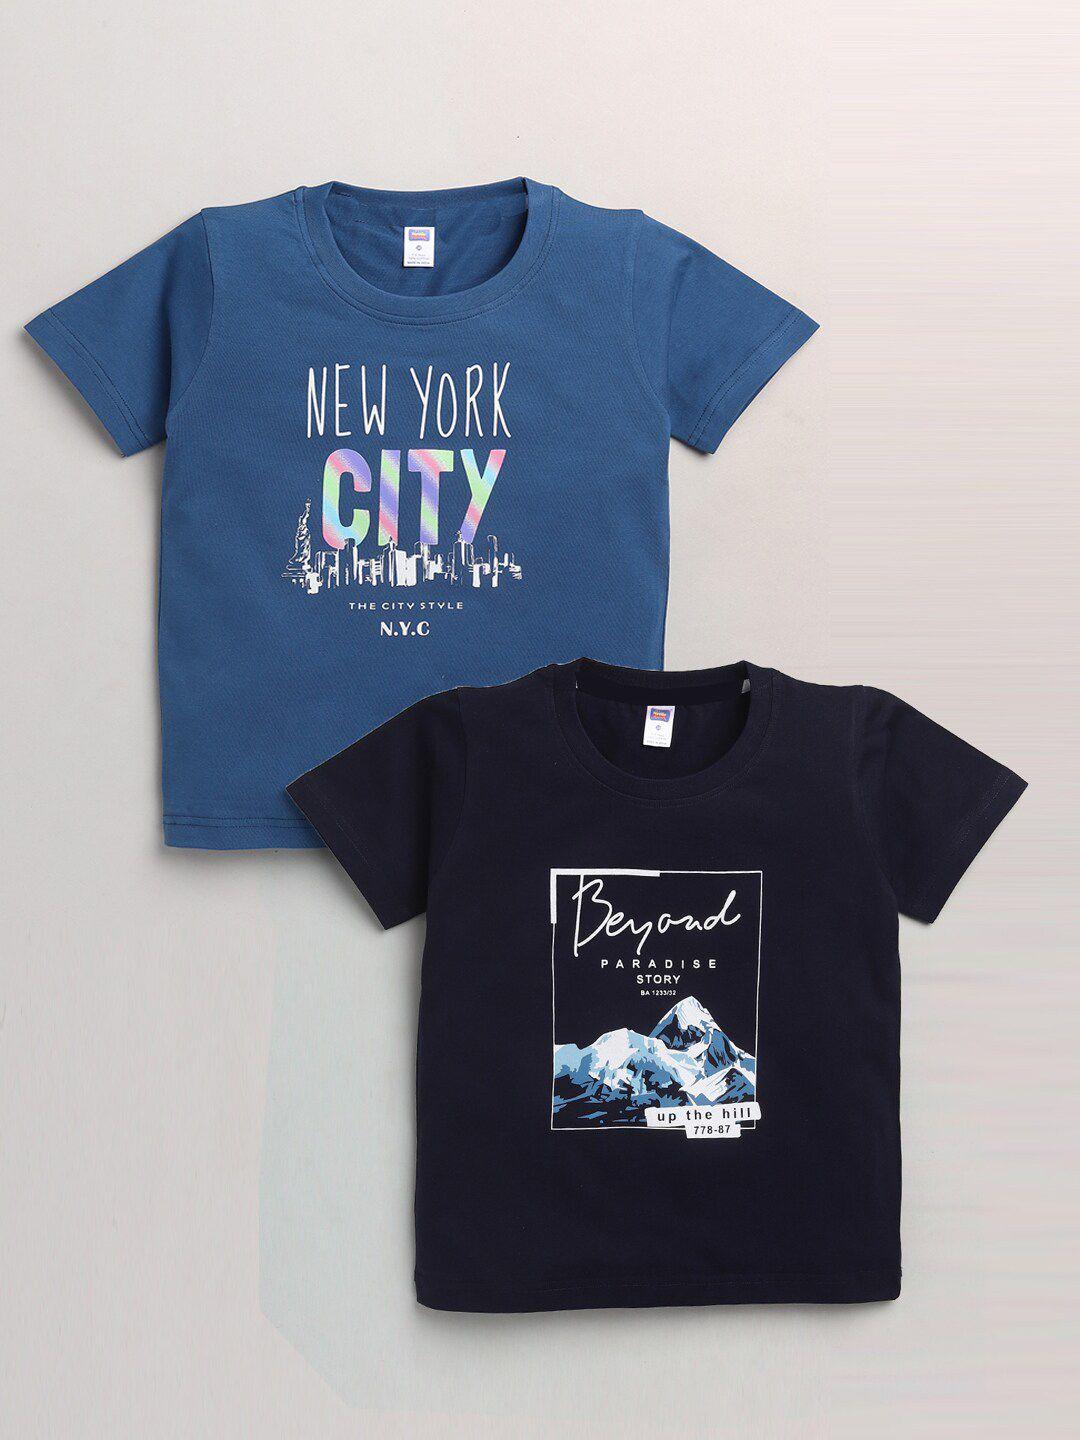 nottie planet boys blue & navy blue typography set of 2 printed t-shirt